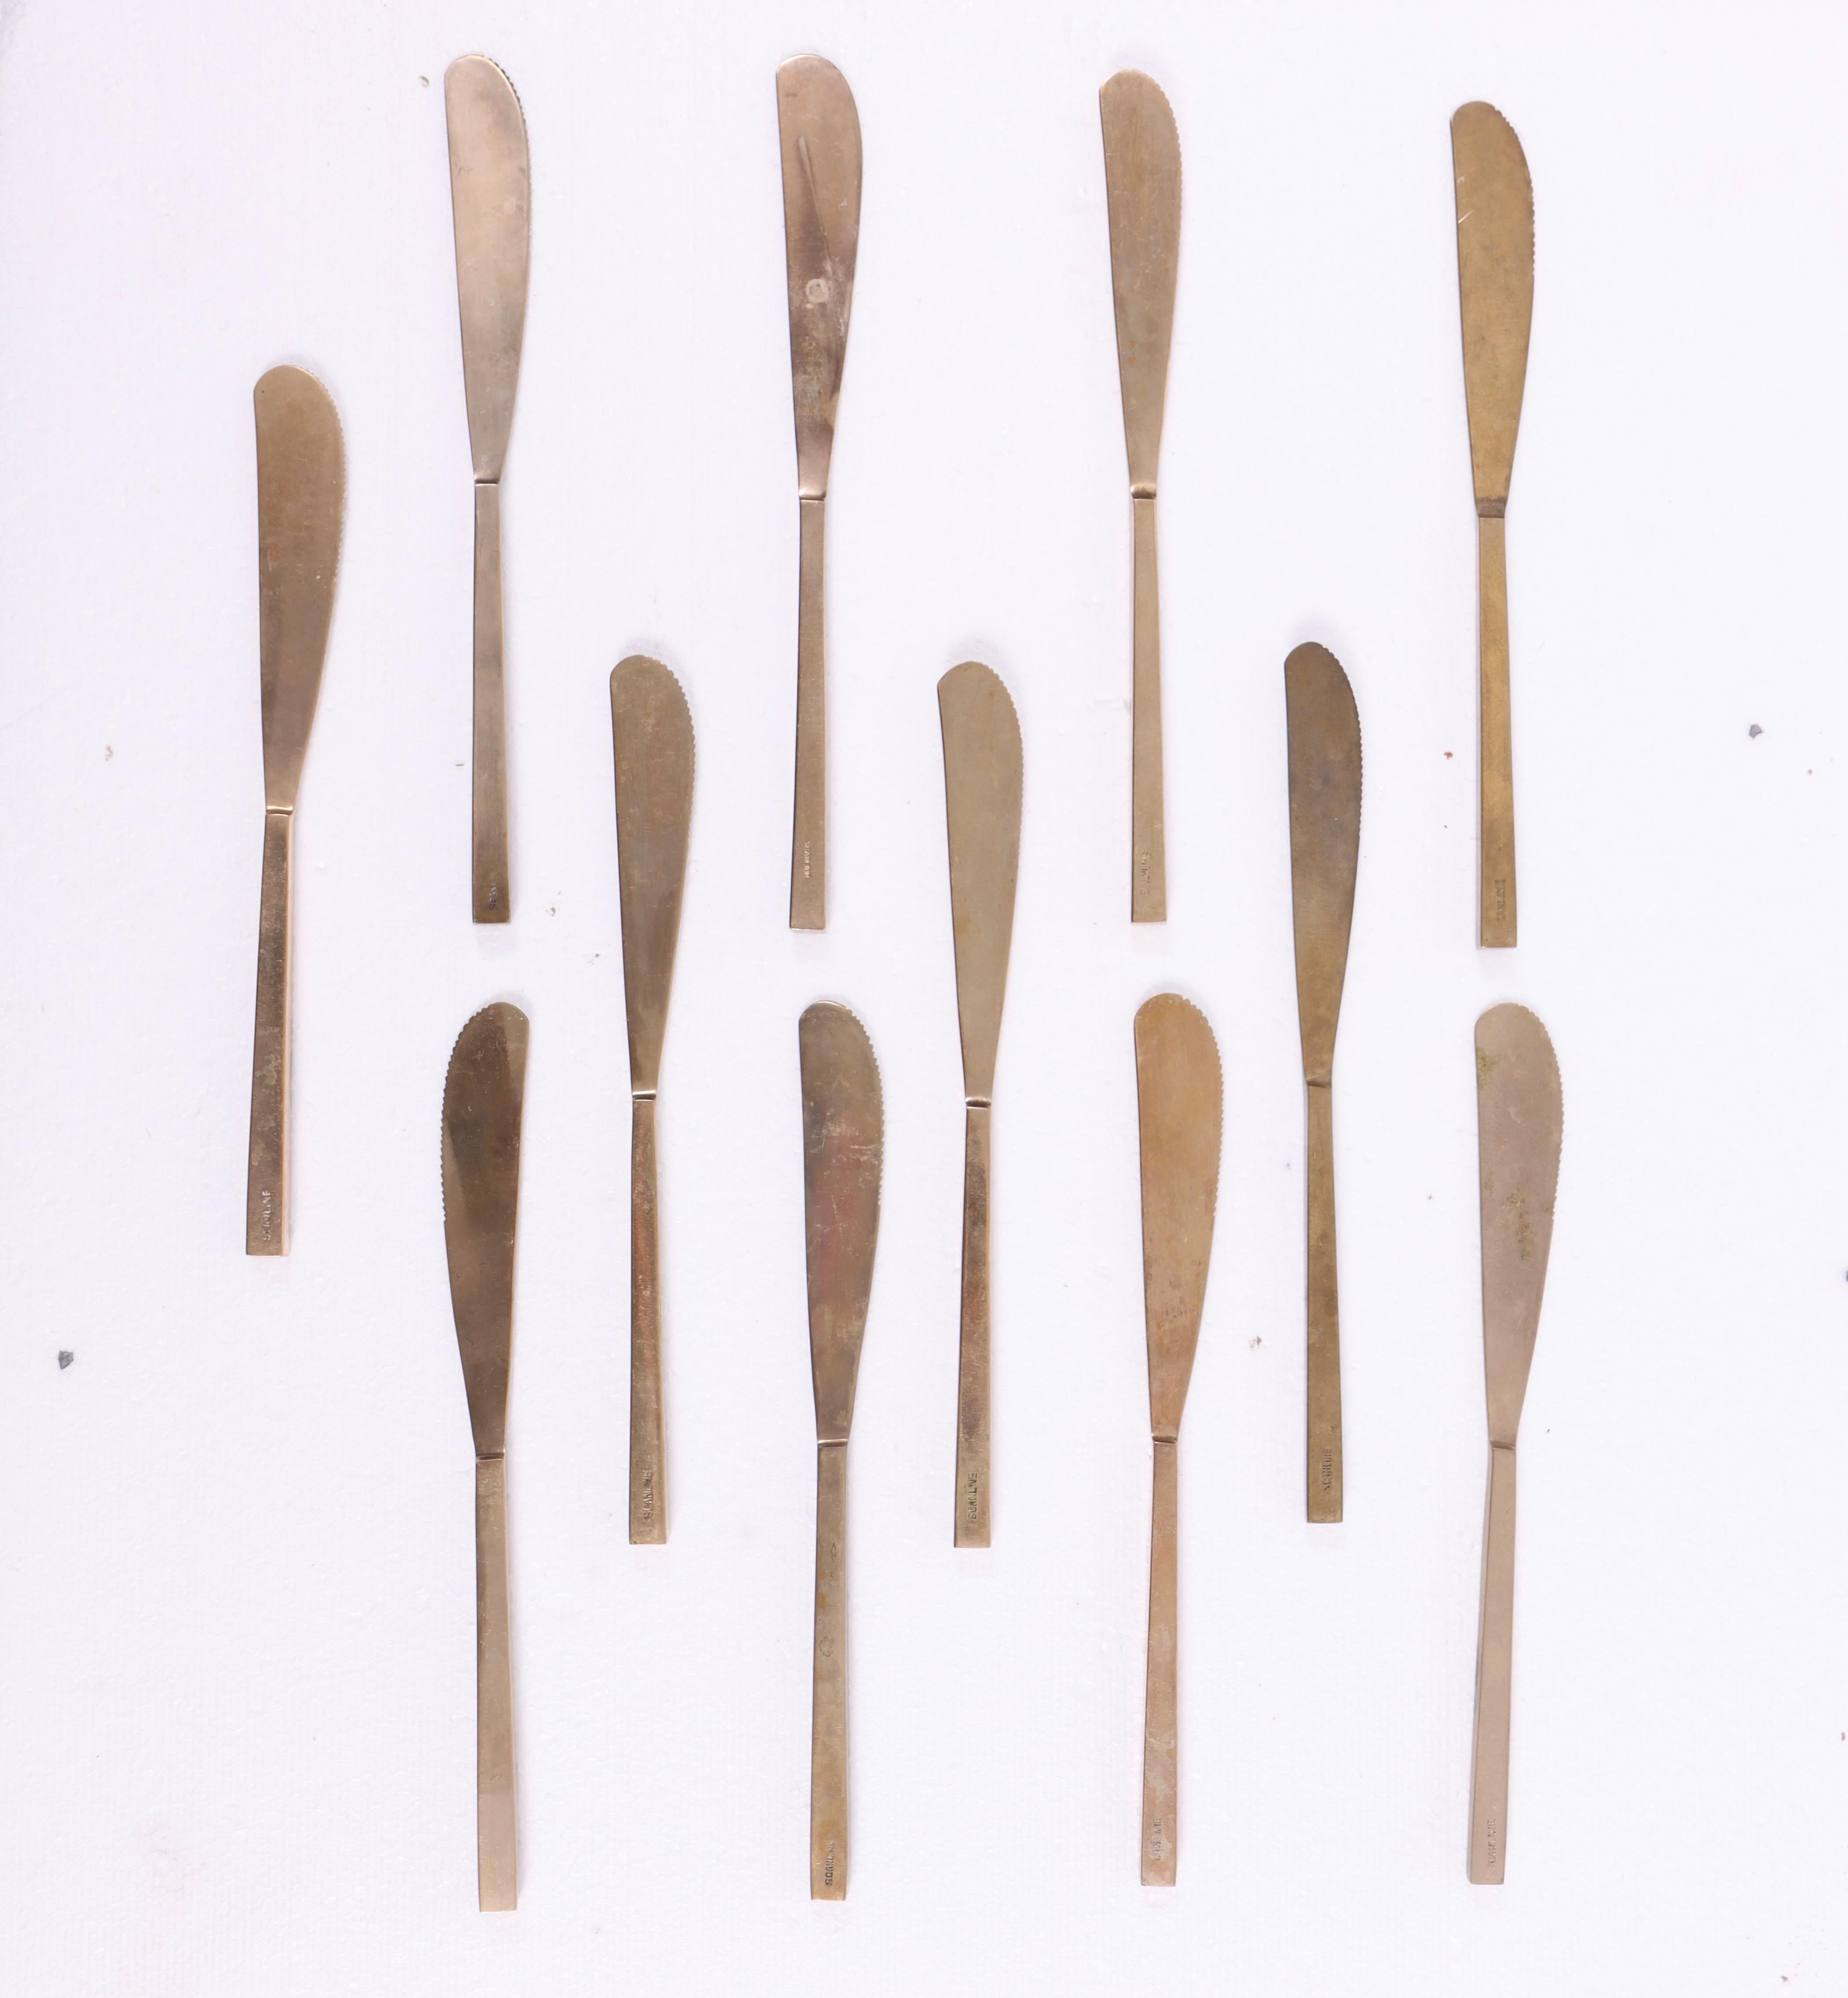 Cutlery for 12 persons in solid bronze designed by Scanline. Made by Broste Denmark in the 1960s .